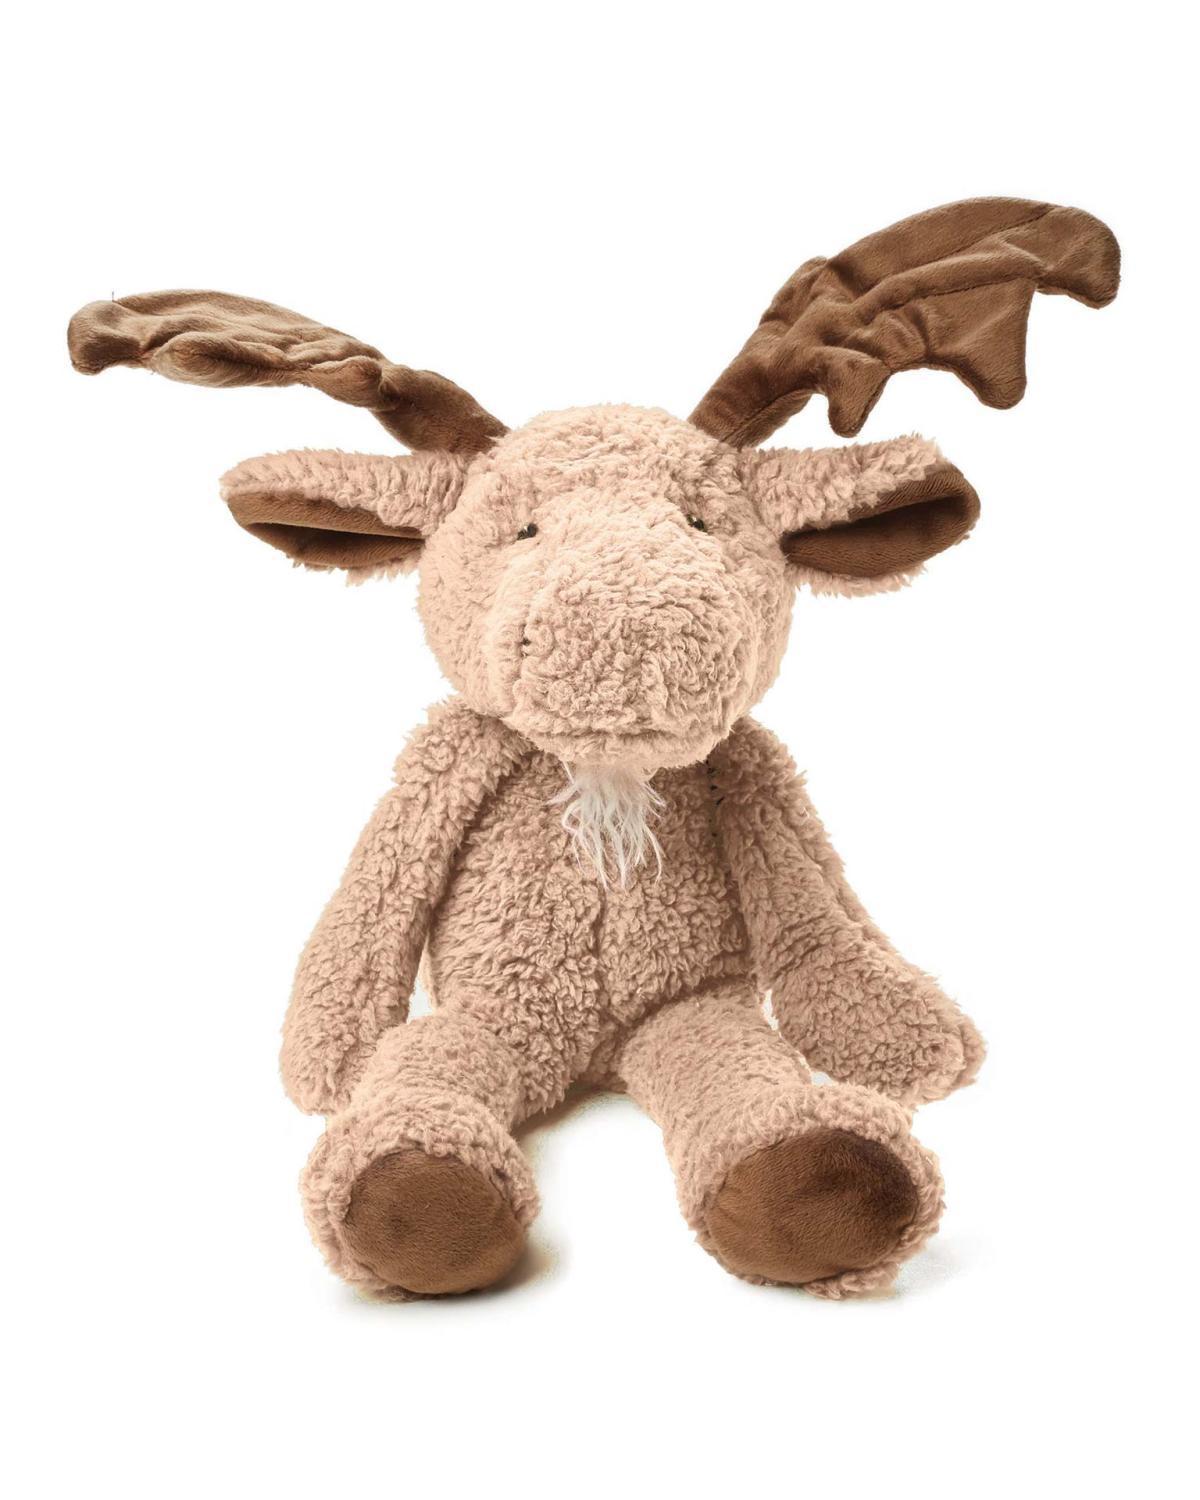 Little bunnies by the bay play Bruce the Moose